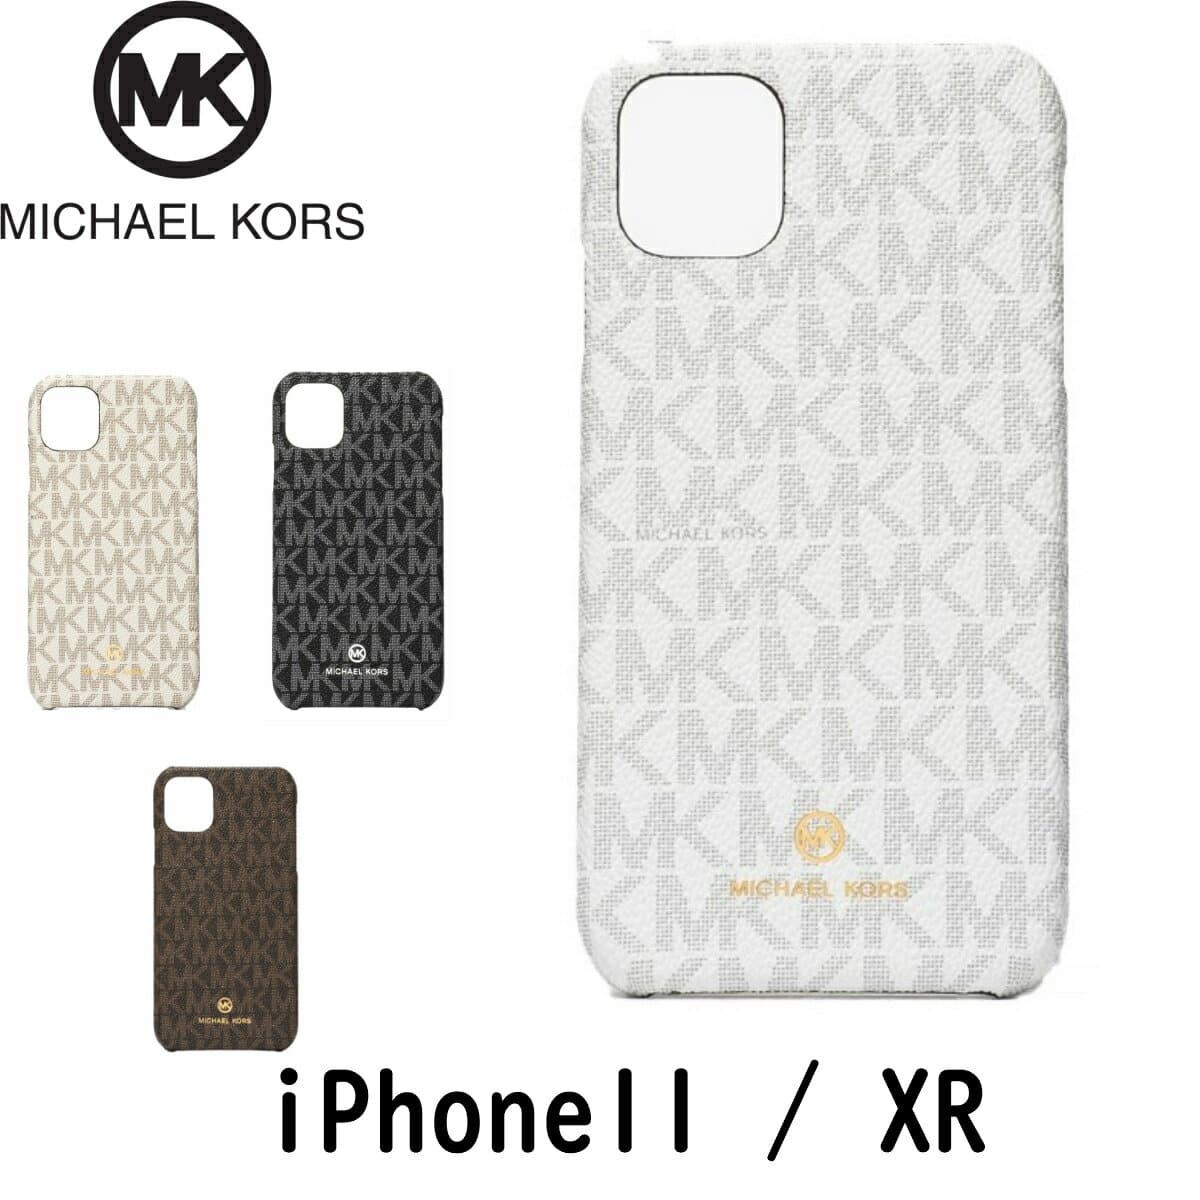 michael kors phone case for iphone xr for Sale OFF 74%